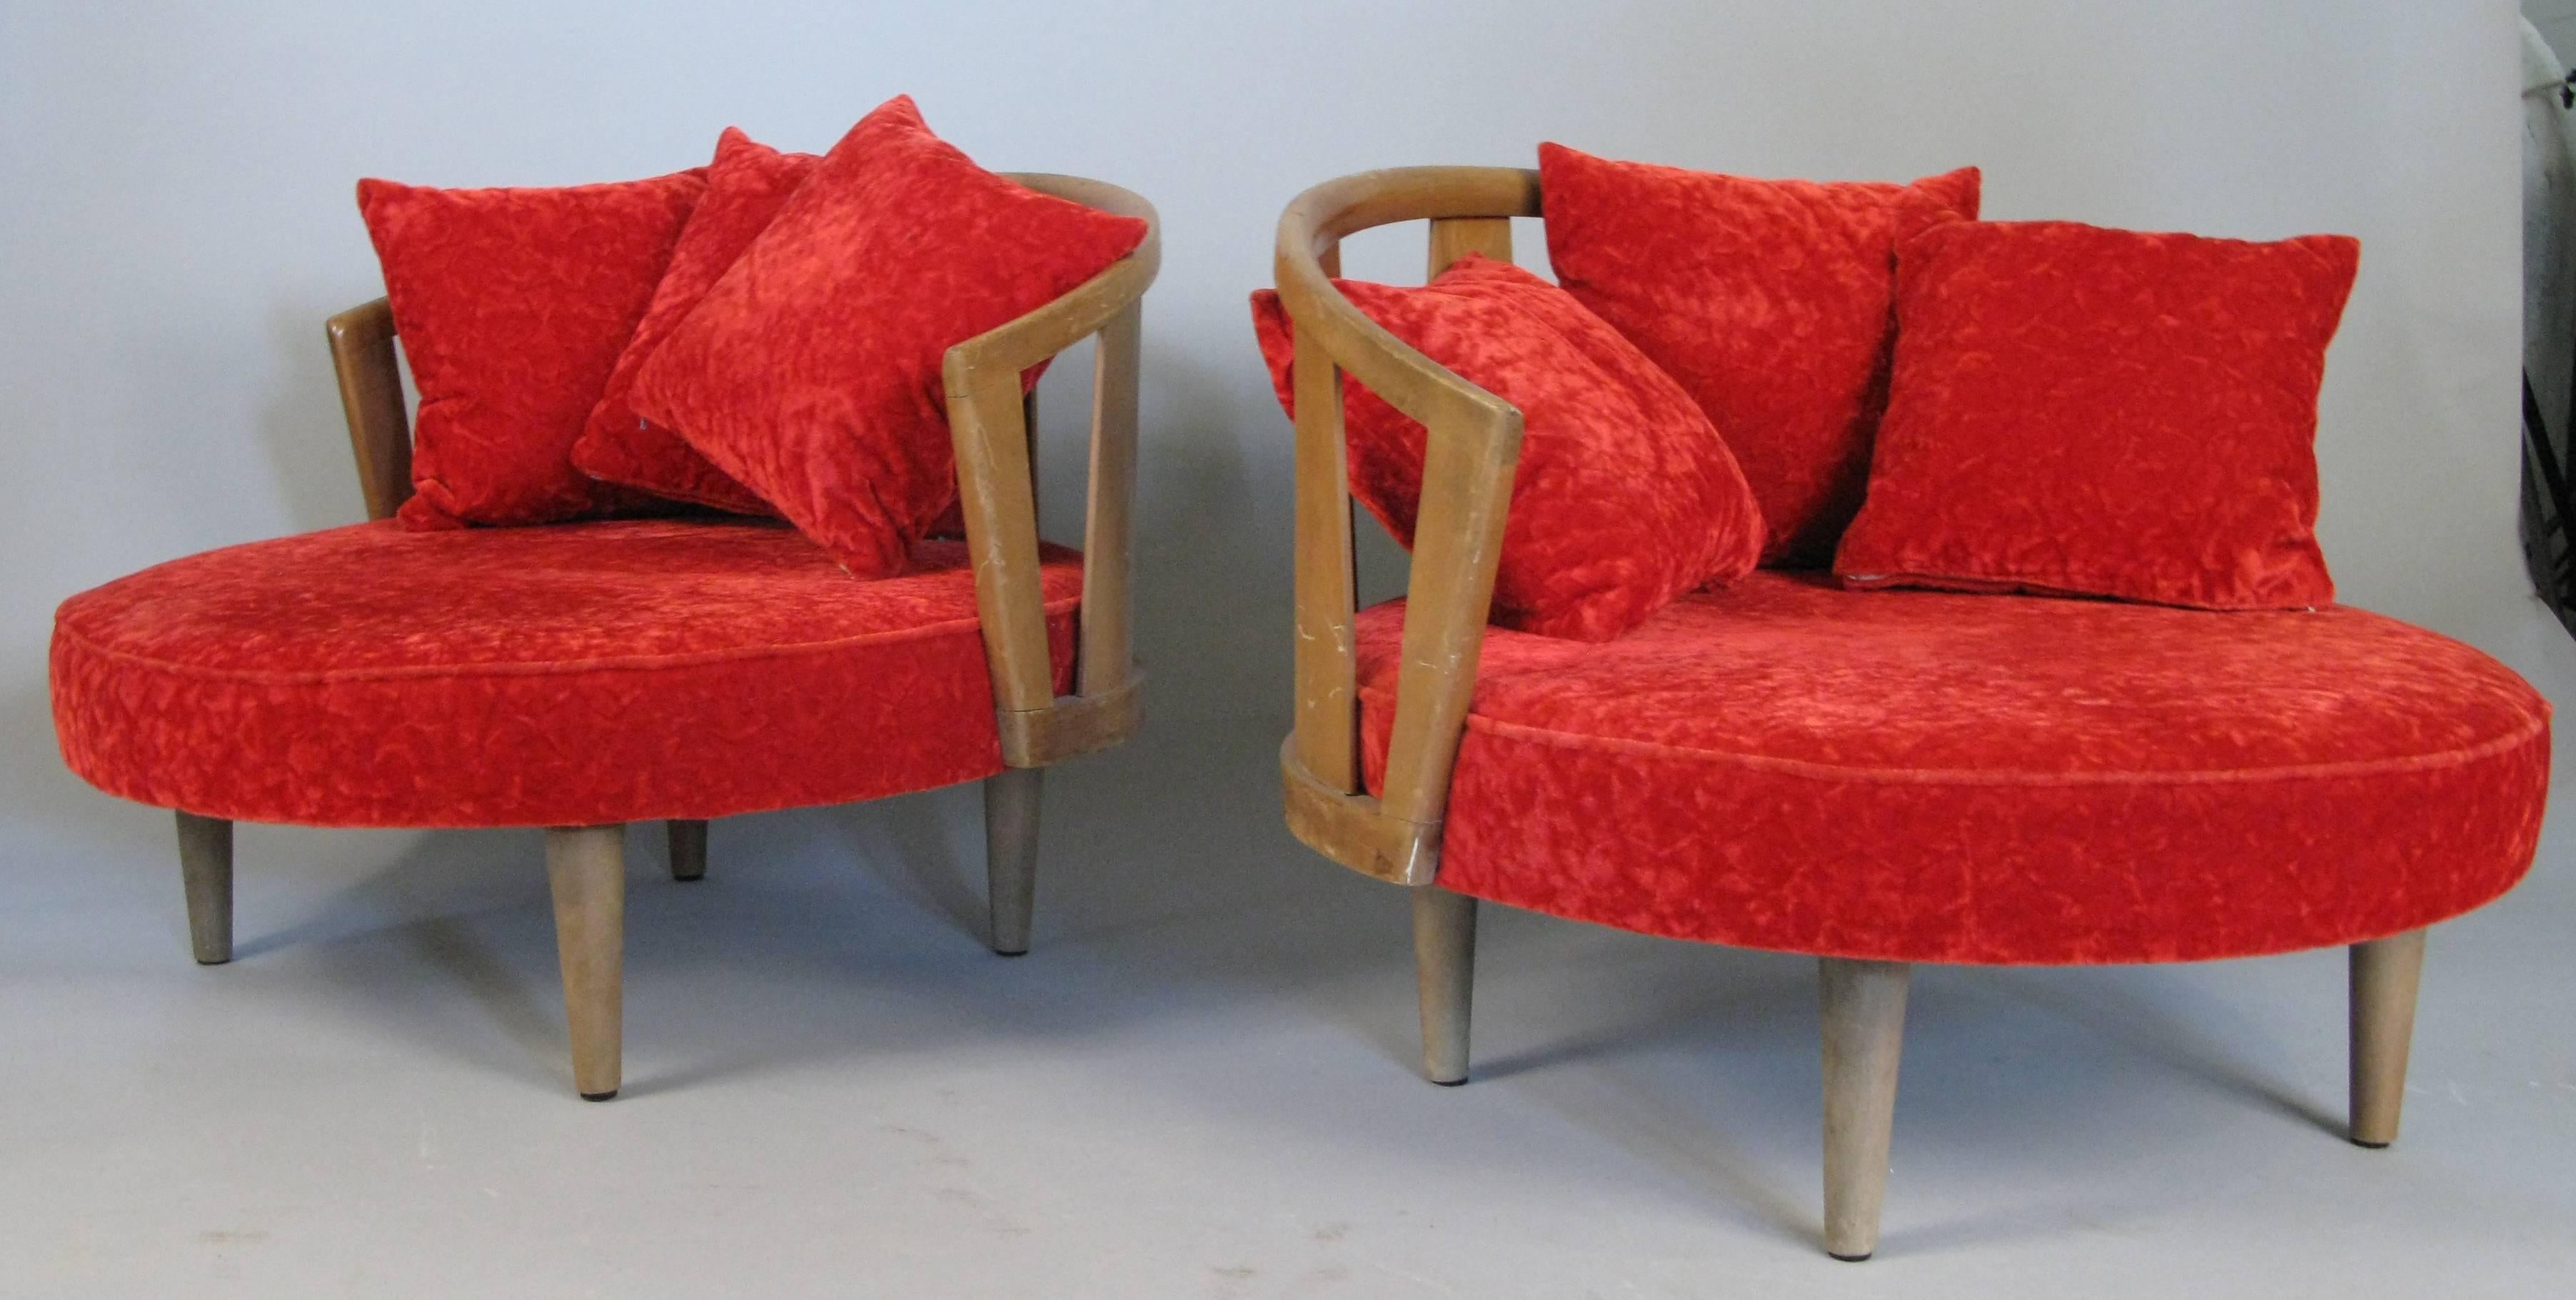 A pair of very cool 1960s modern circular lounge chairs by Adrian Pearsall for Craft Associates, with upholstered seats, curved walnut backs and loose cushions, in original condition.